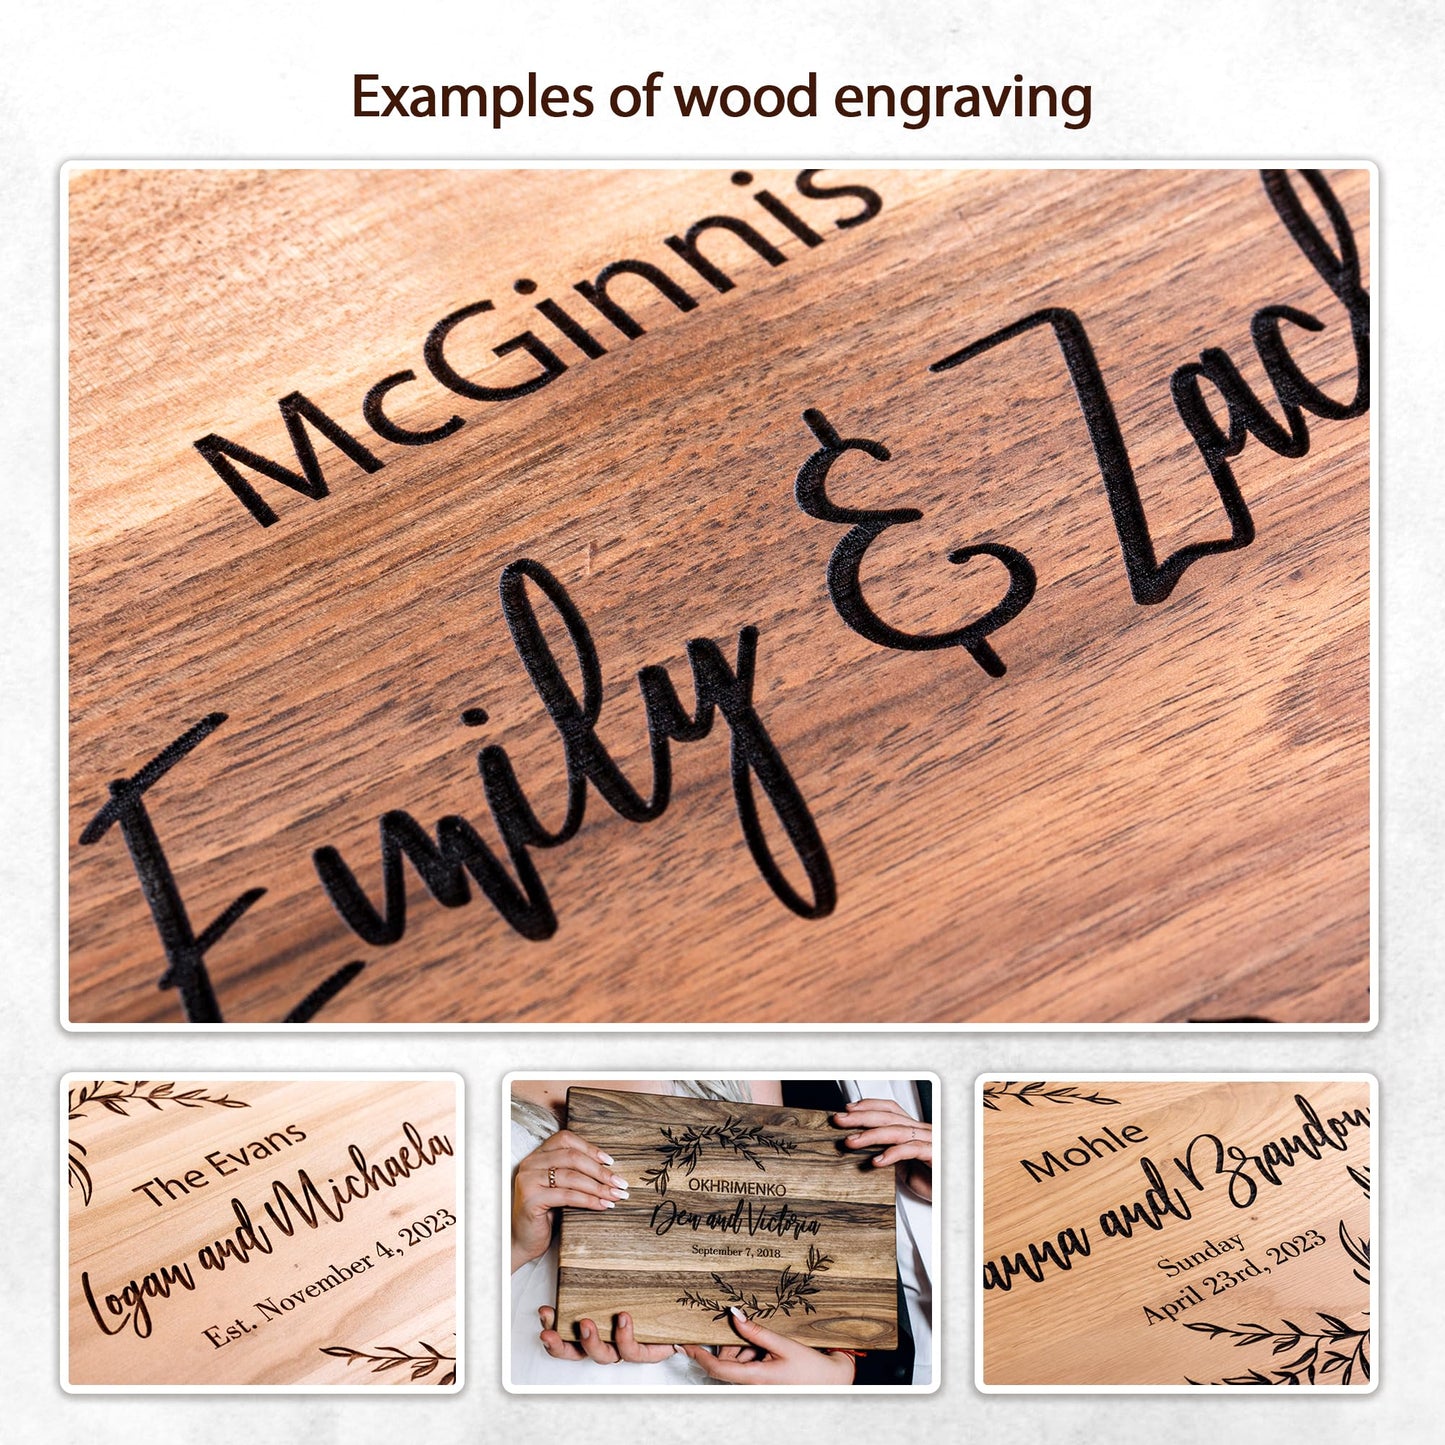 Wedding Anniversary Gifts for Women, Walnut Personalized cutting board, Wedding Gift - for couple or bride, Engraved cutting board, Custom cutting